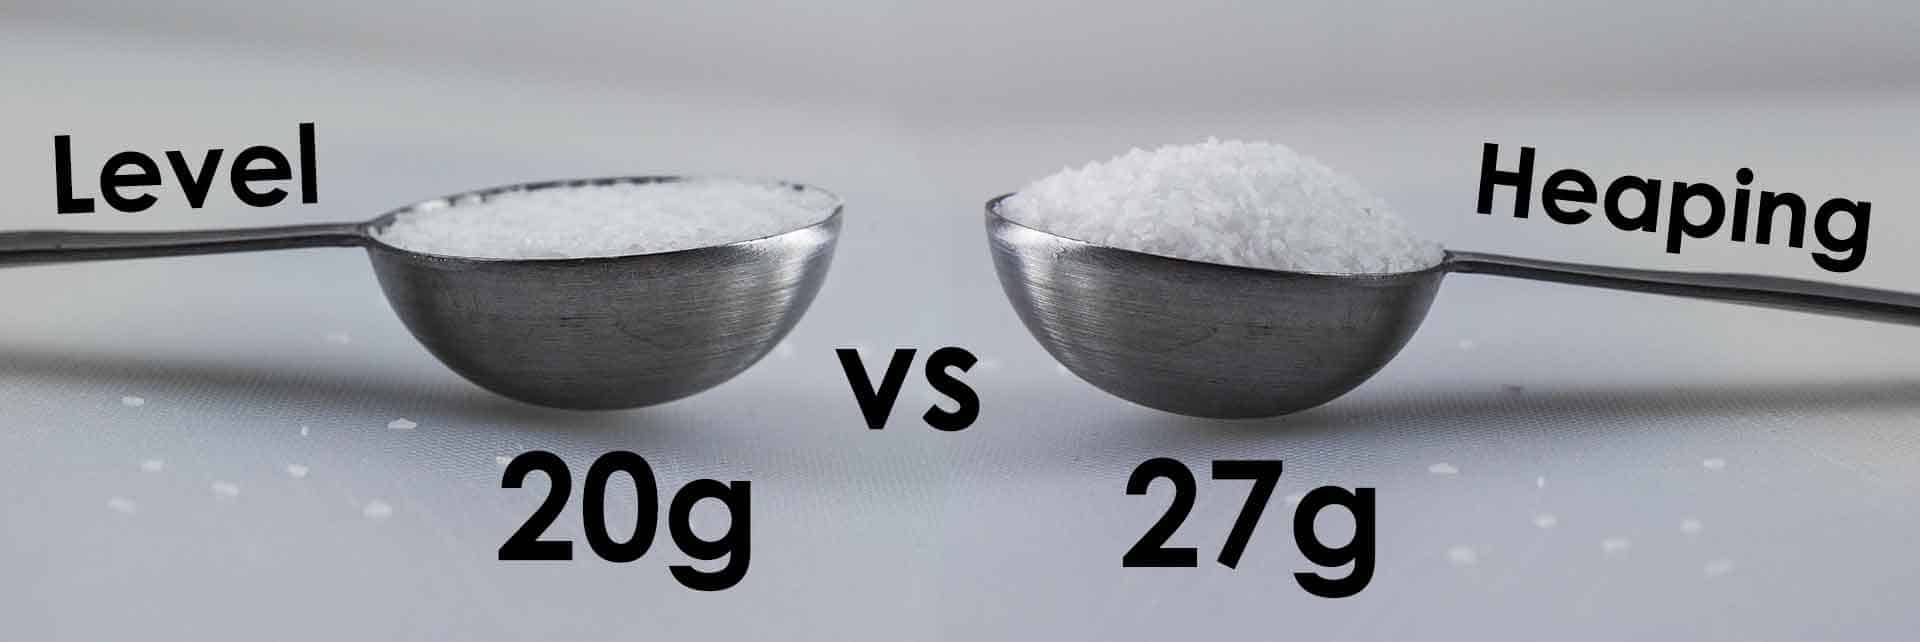 a level tablespoon salt vs a heaping spoon side by side